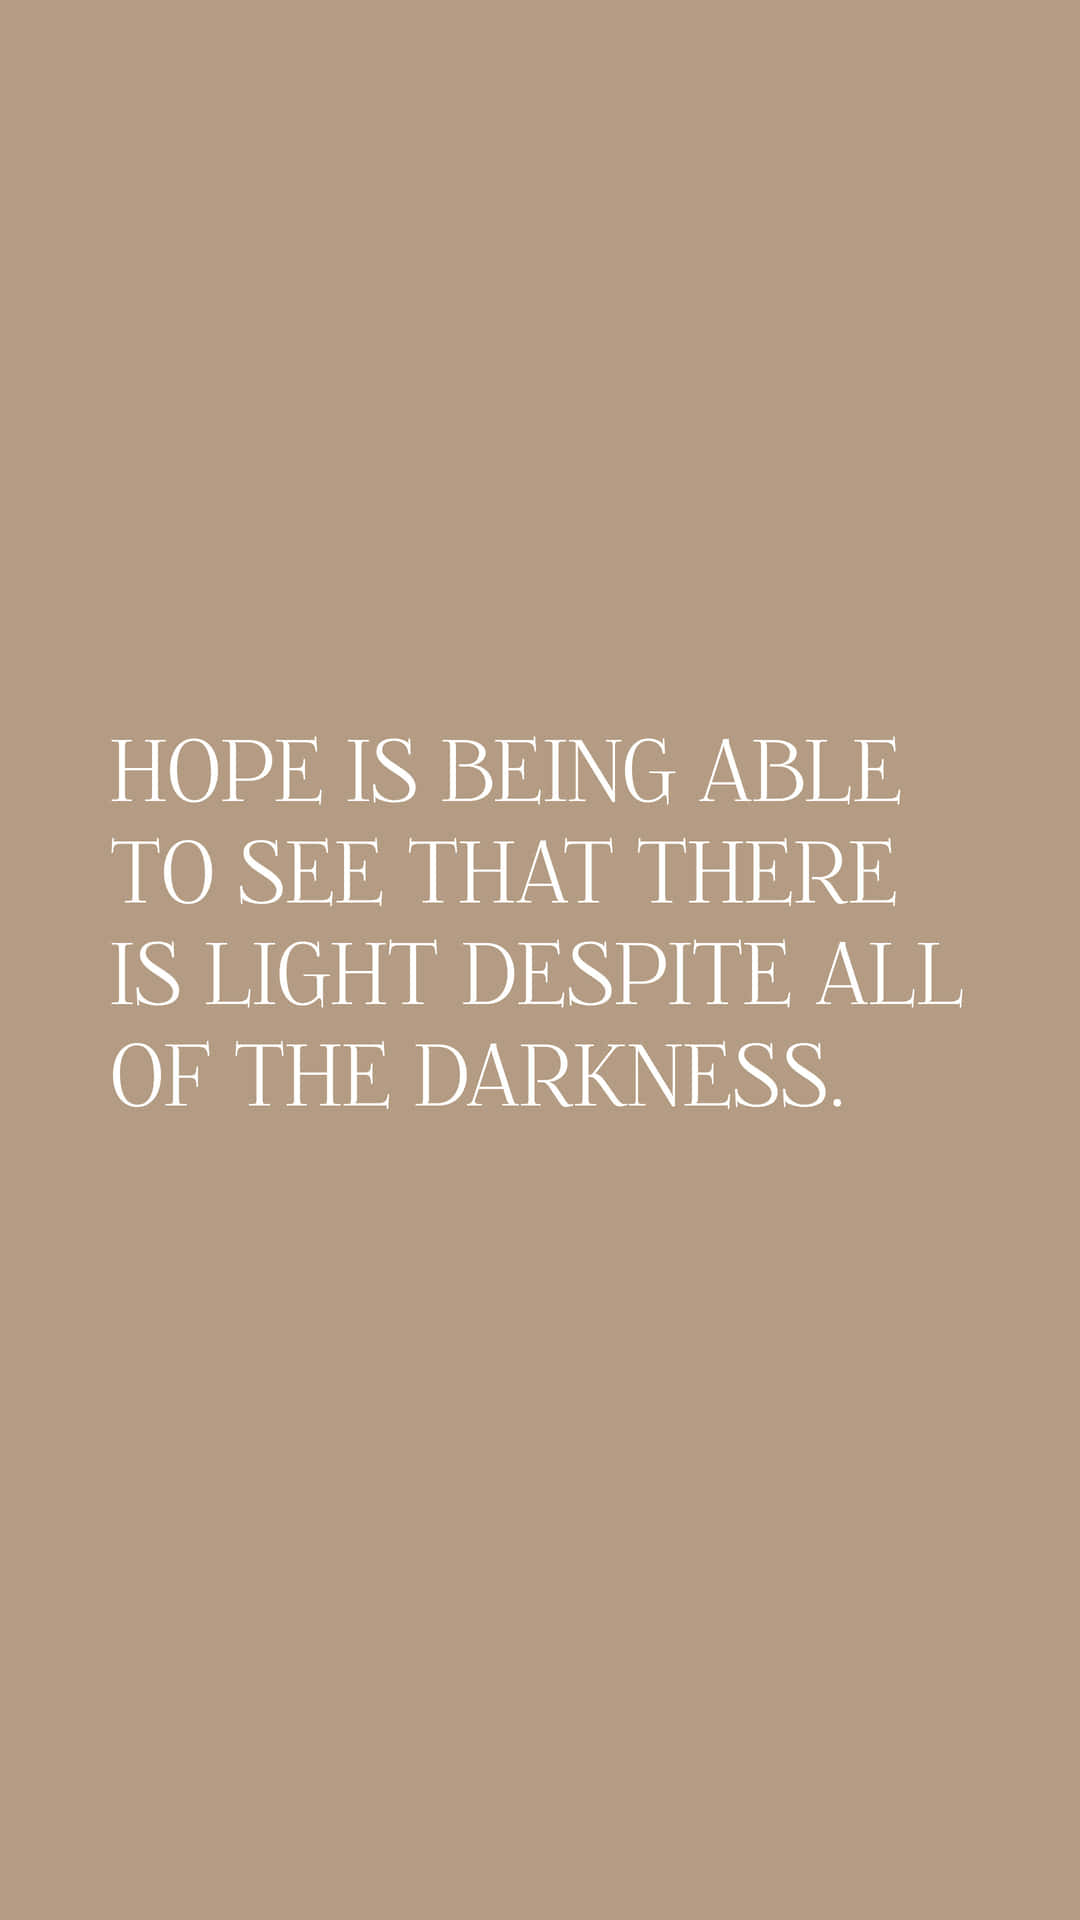 Inspiring Hope Quote Against A Warm Tan Background Background